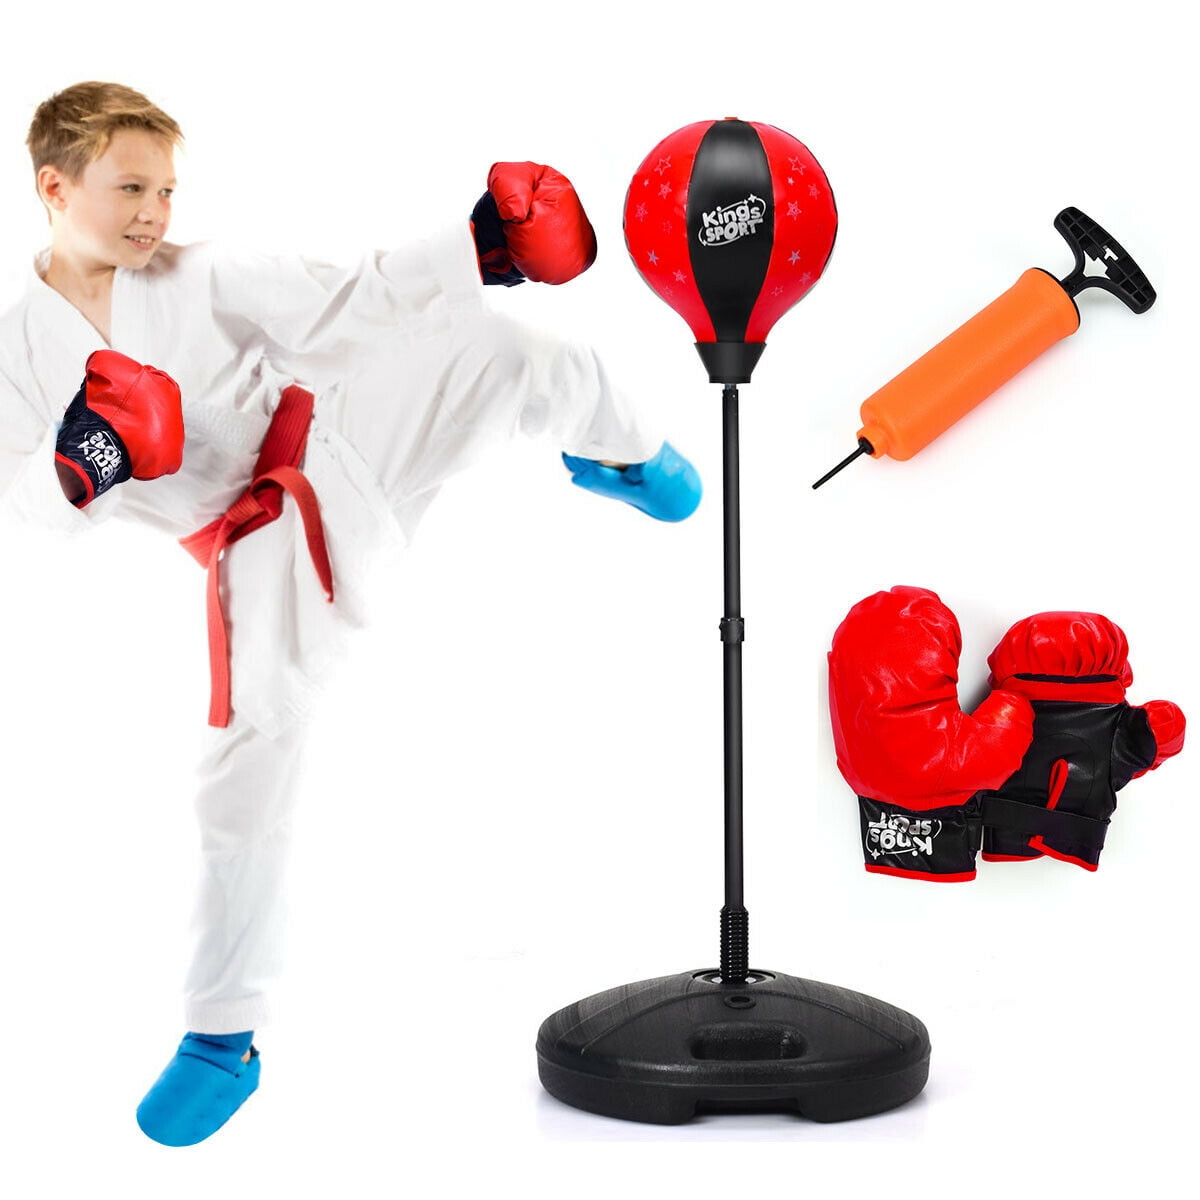 Details about   Punching Bag Boxing Gloves Set Unisex Kids Games Toys Children's Birthday Gifts 